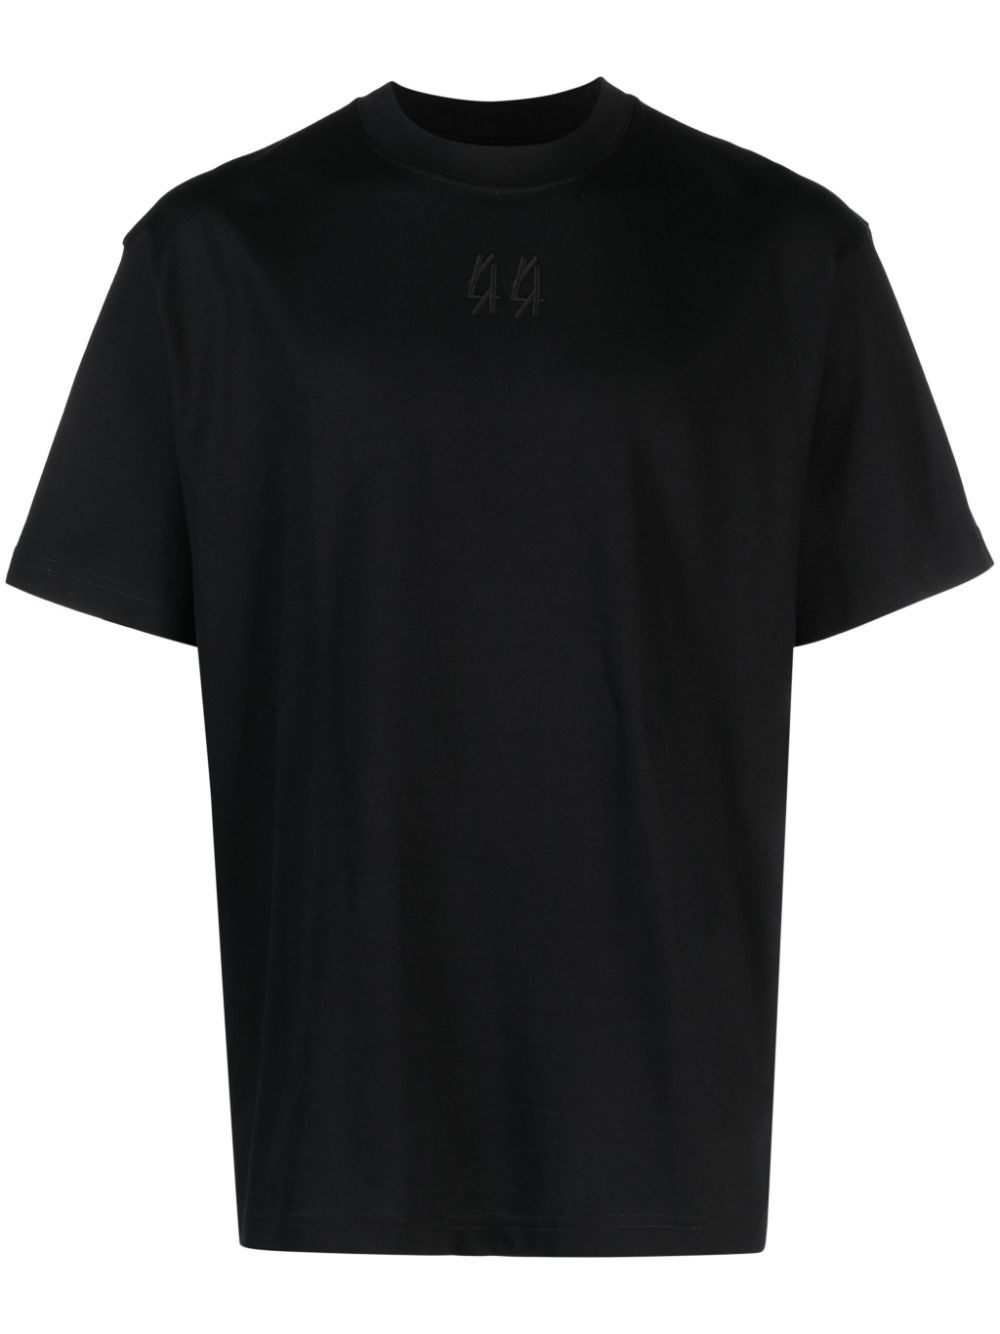 44 Label Group Printed T-shirt In Black  